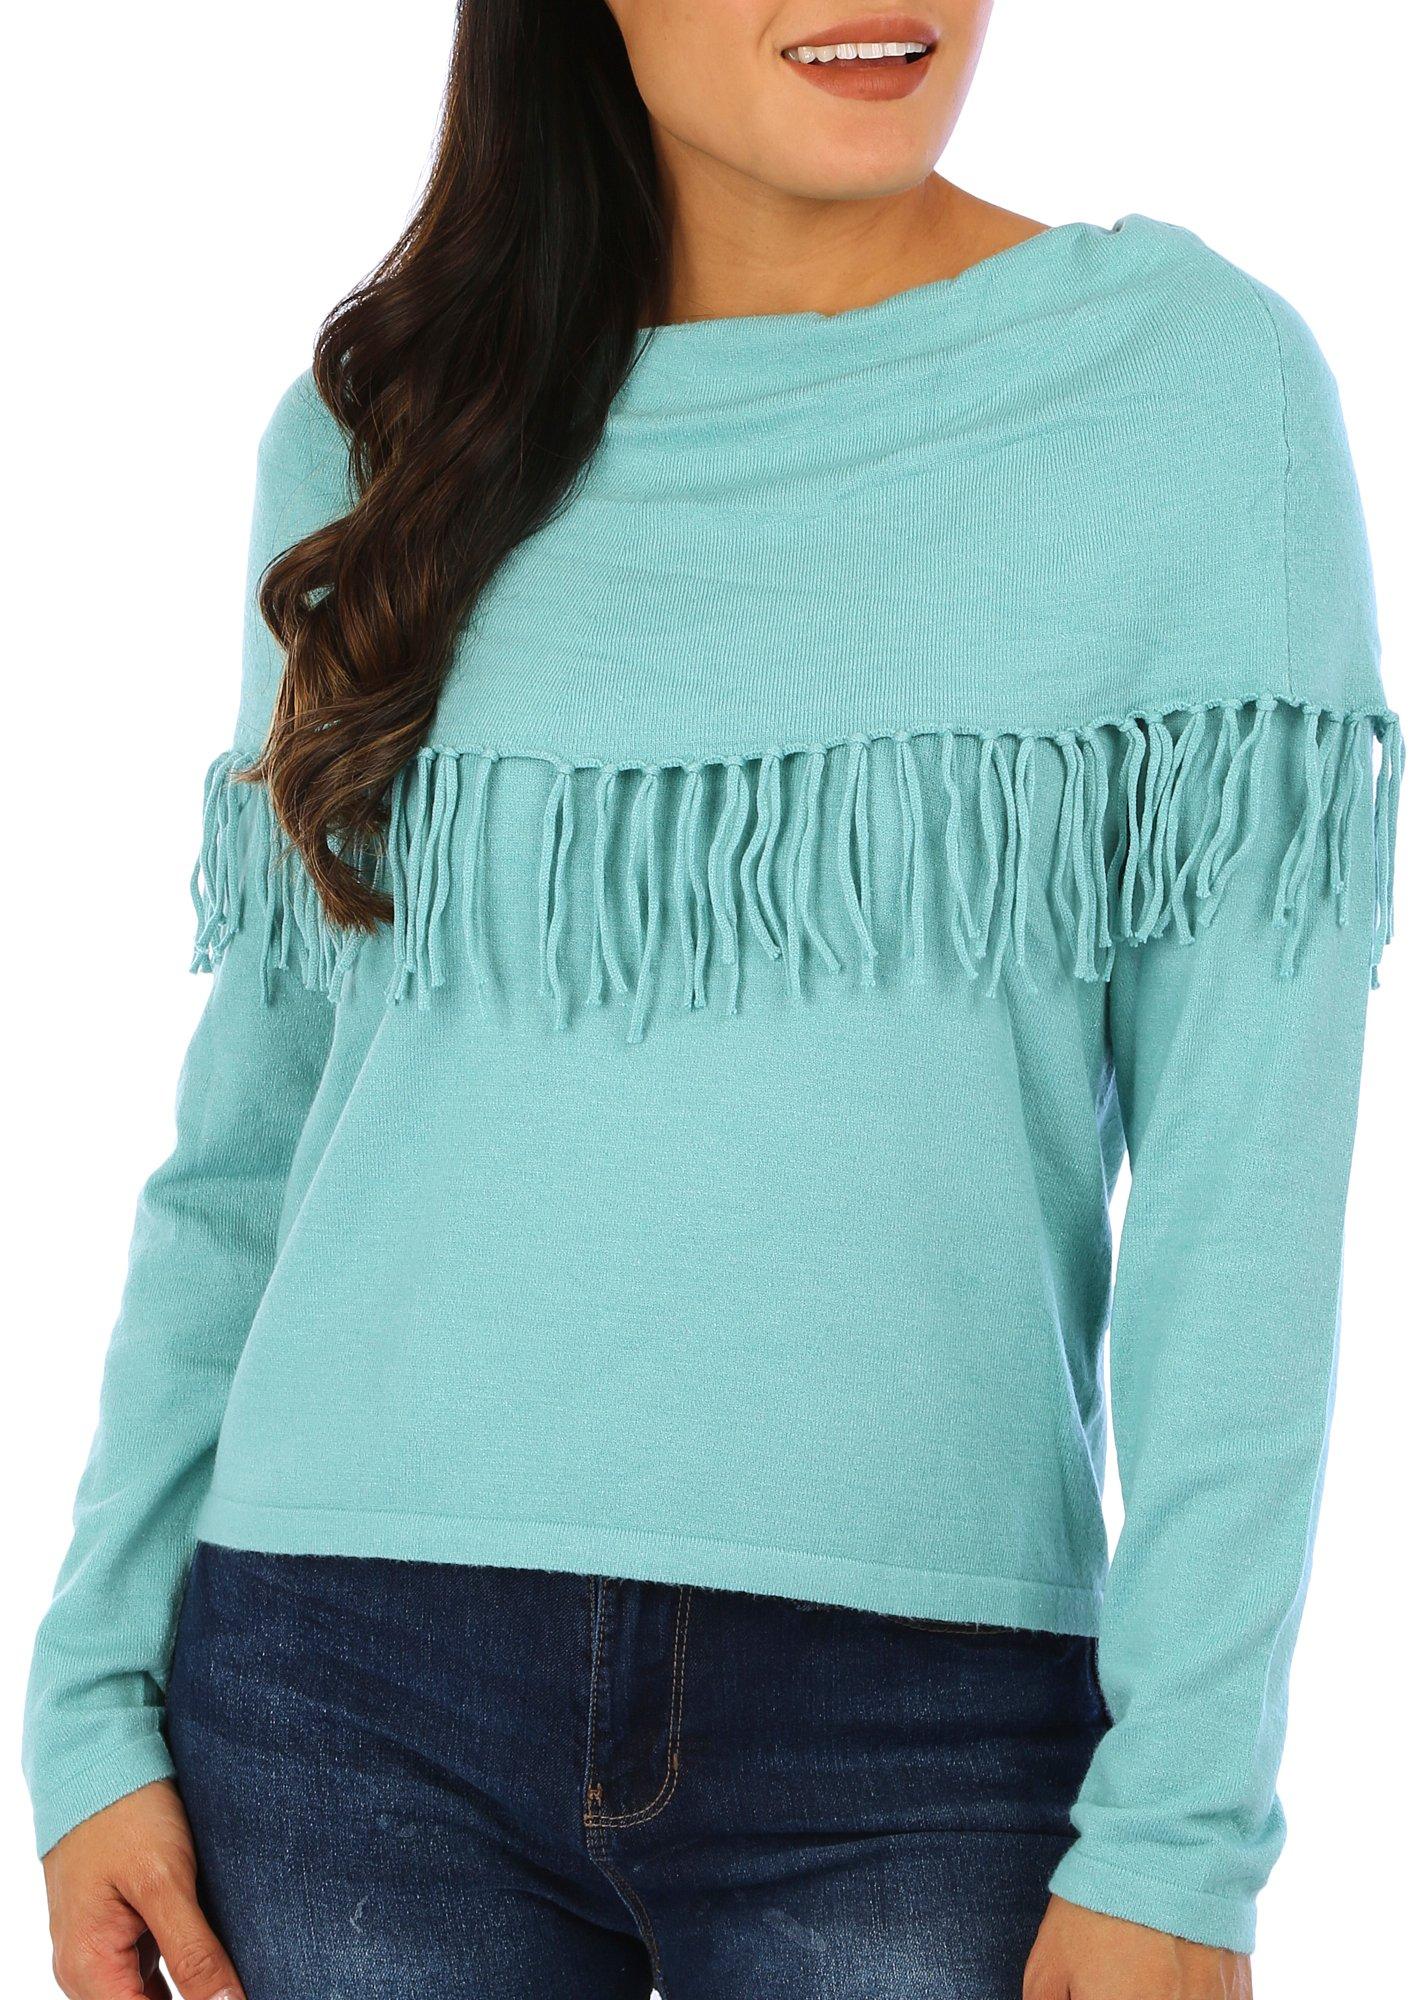 Womens Embellished Cowl Neck Long Sleeve Sweater